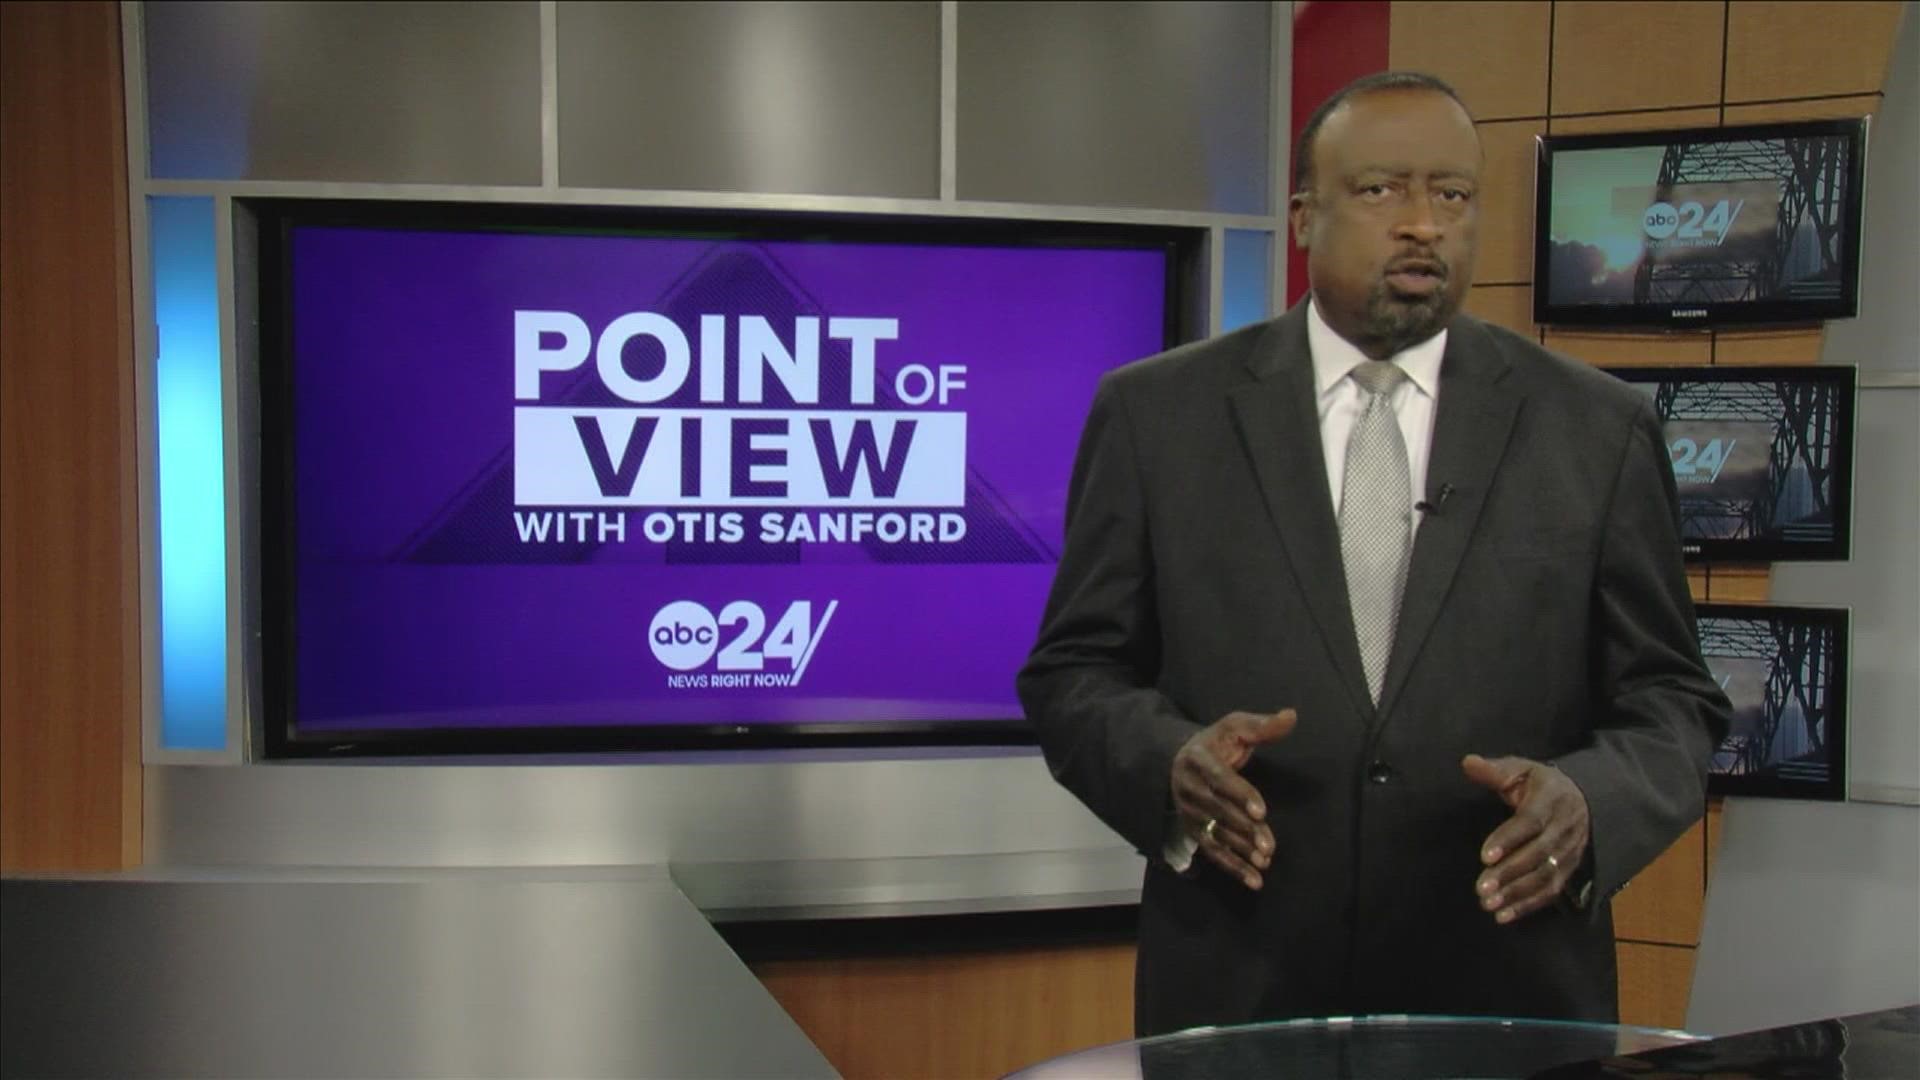 ABC24 political analyst and commentator Otis Sanford shared his point of view on the controversy over the Shelby County Clerk’s Office.